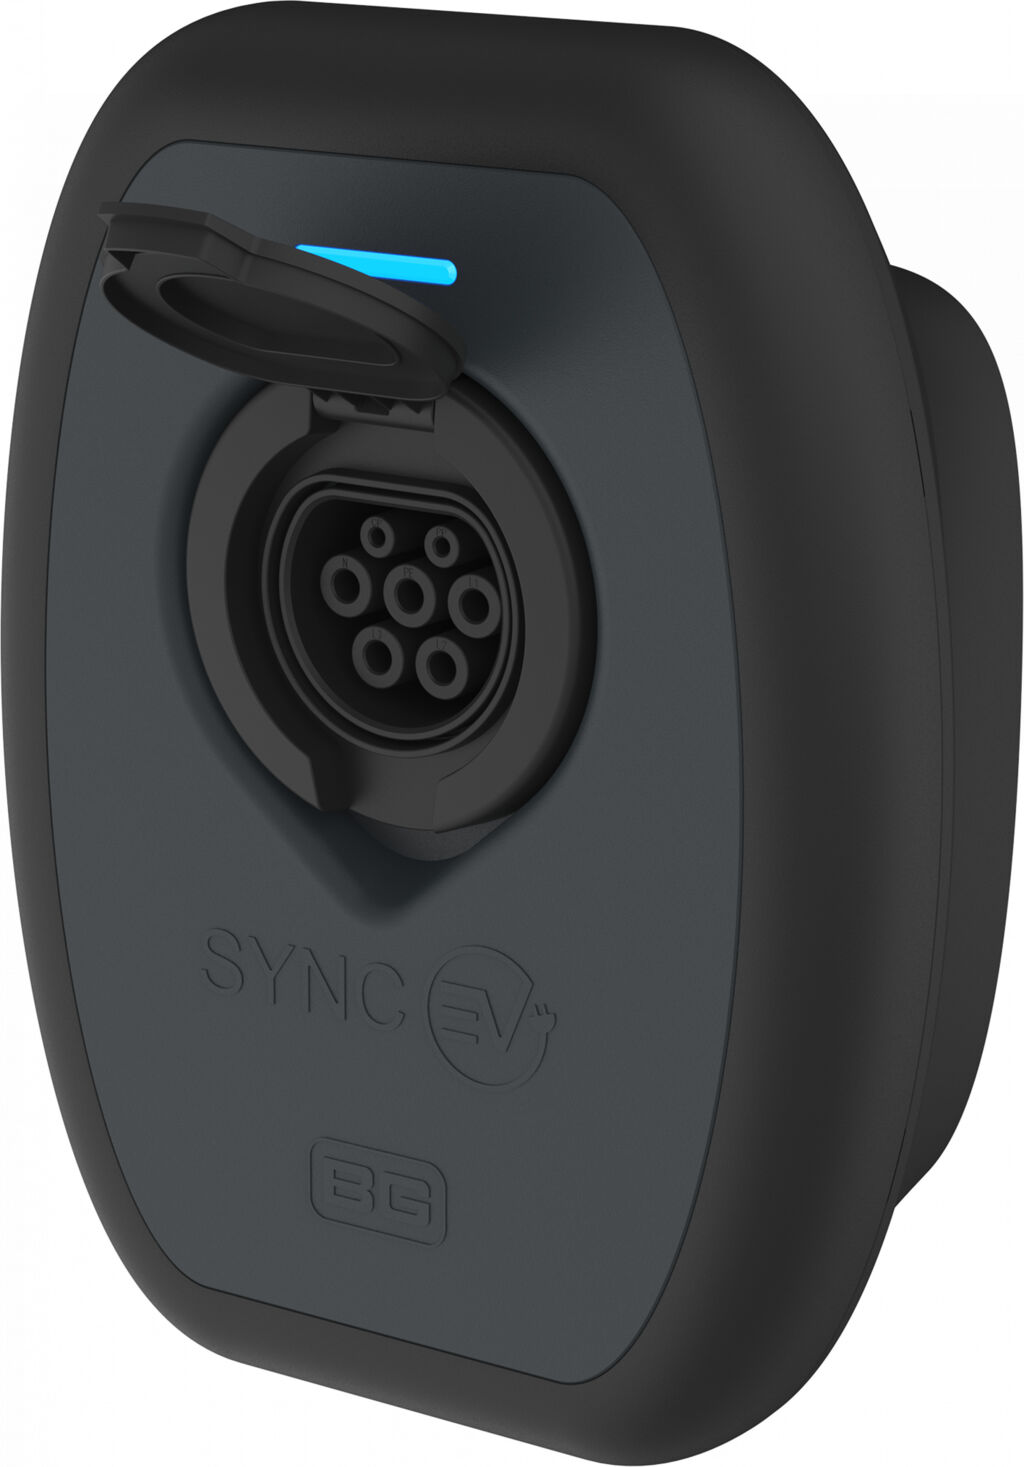 BG SyncEV EVWC2S7G 7.4kW Wall Charger Socket with WiFi & Smart Functionality